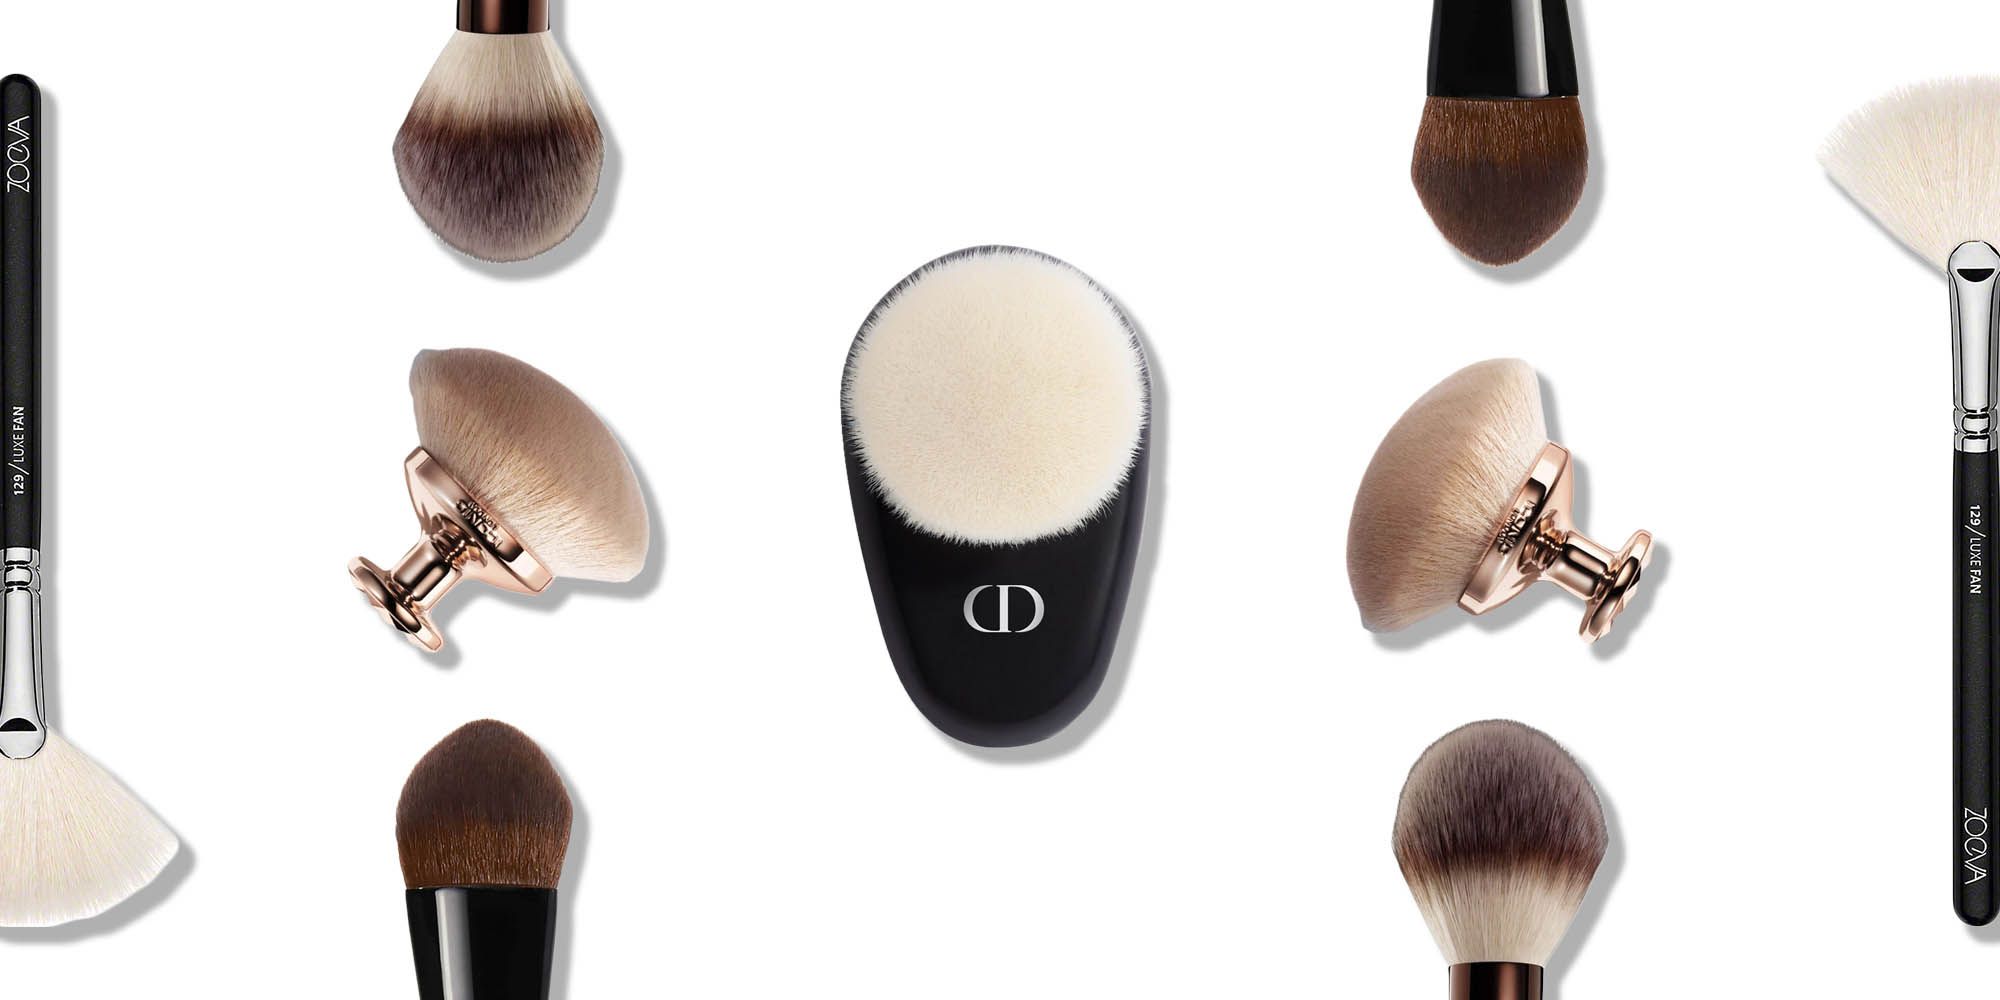 Chanels Makeup Brush Set Reviewed  Into The Gloss